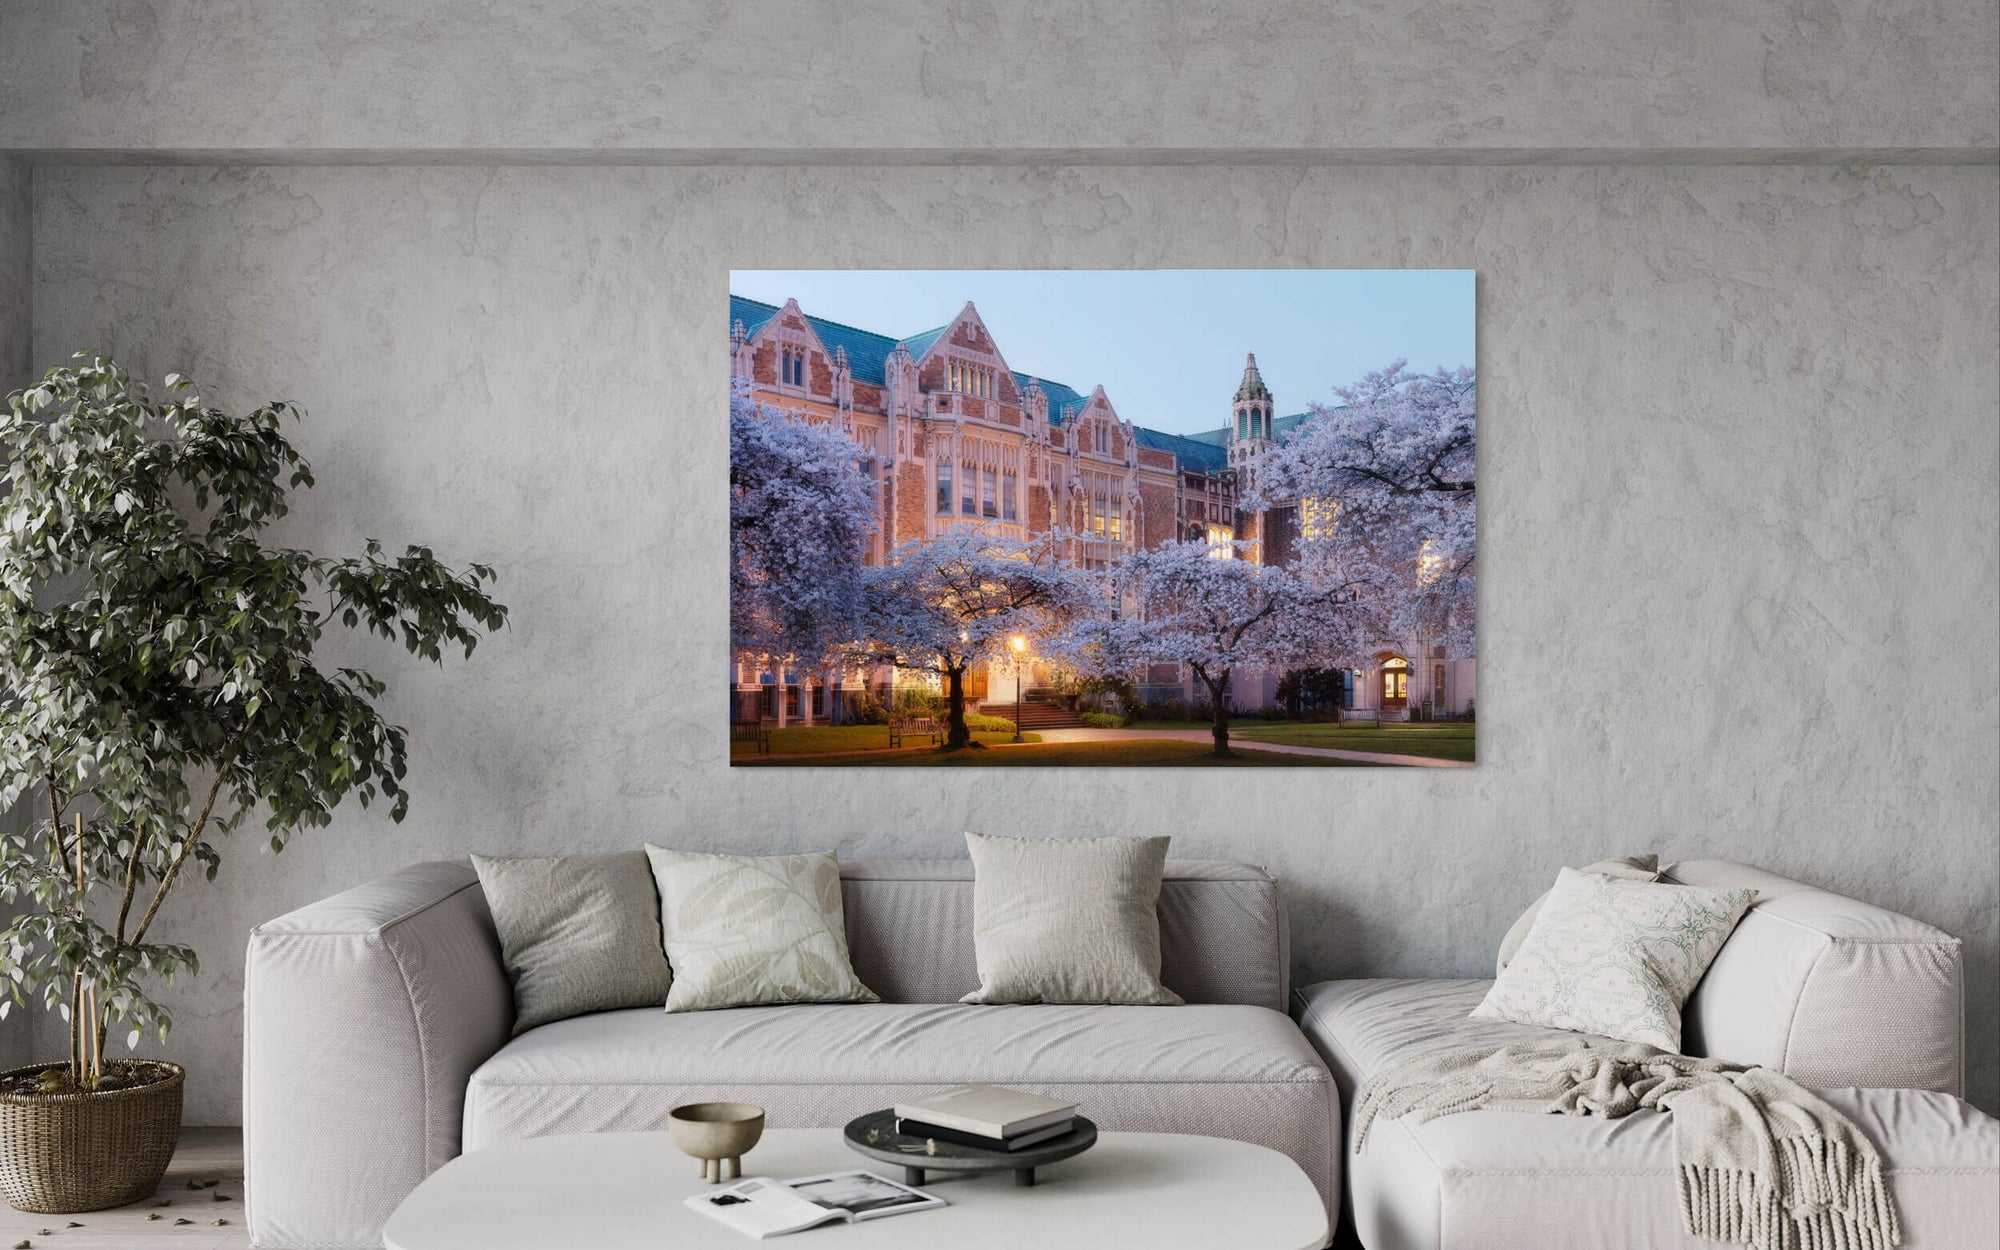 A piece of Seattle art showing the UW cherry blossoms hangs in a living room.